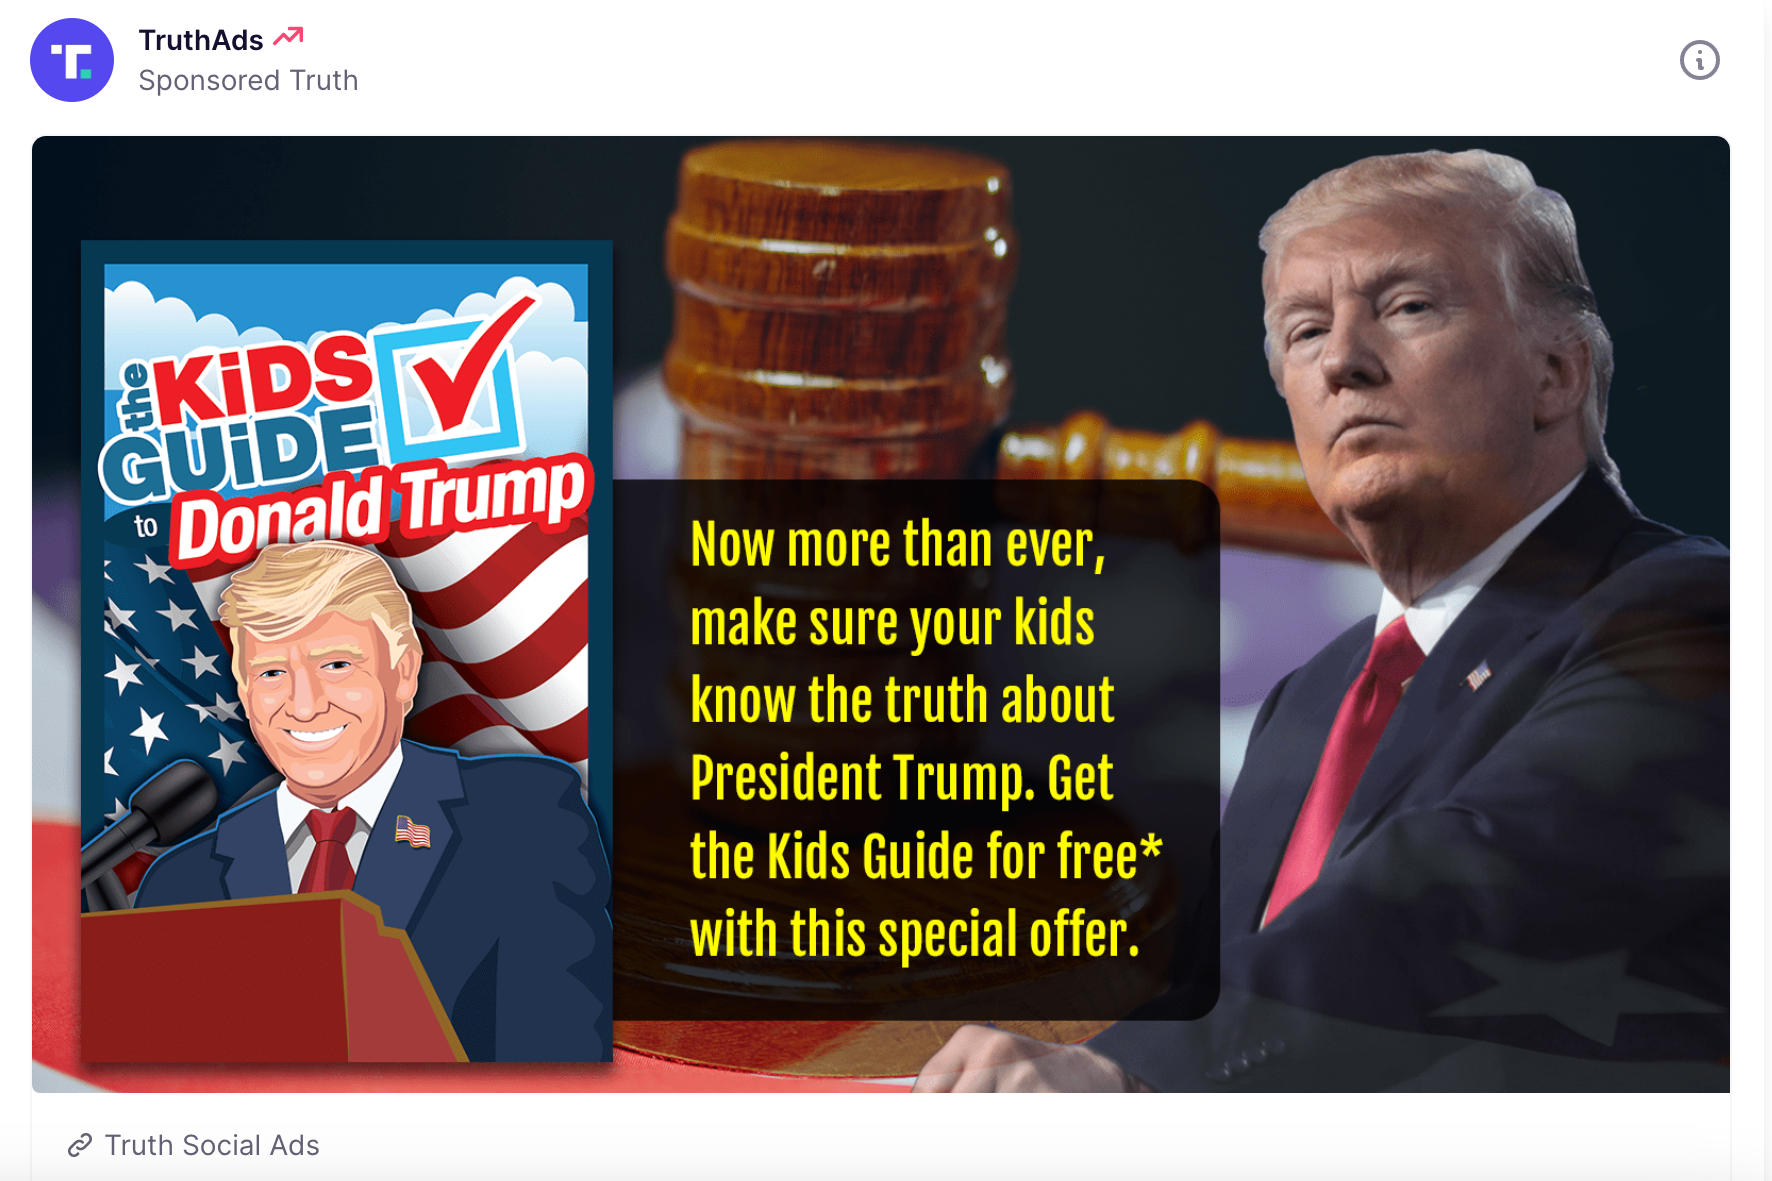 A Truth Social sponsored post advertising a book titled The Kids Guide to Donald Trump